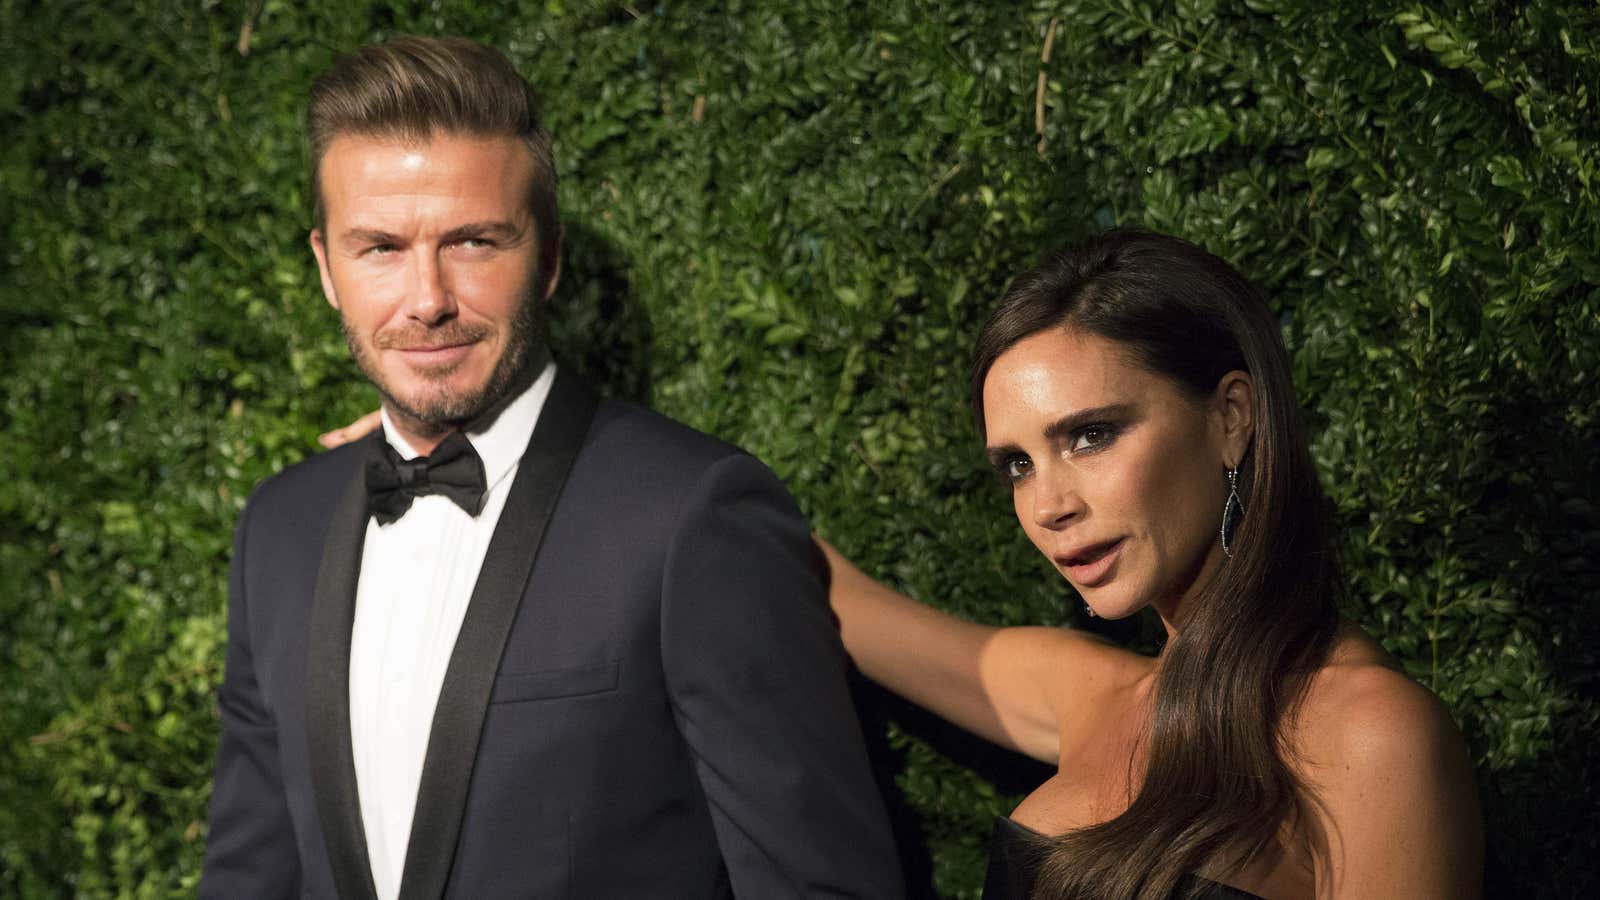 Victoria and David Beckham are launching their own beauty lines